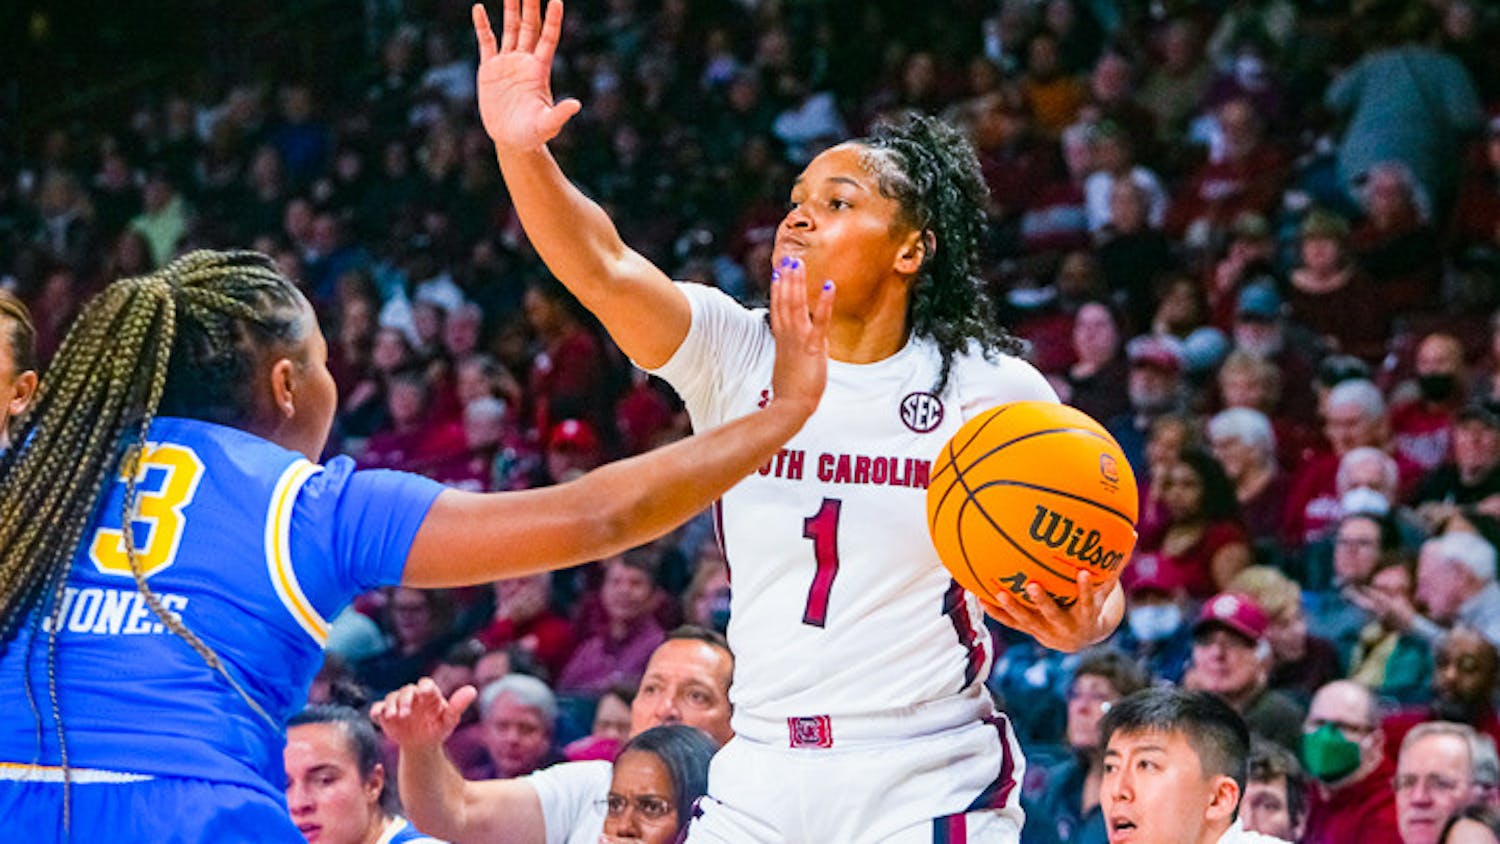 Senior guard Zia Cooke looks for an open teammate during the match-up against UCLA on Nov. 29, 2022. Cooke scored 12 points within the first 35 minutes of the game. The Gamecocks beat the Bruins 73-62.